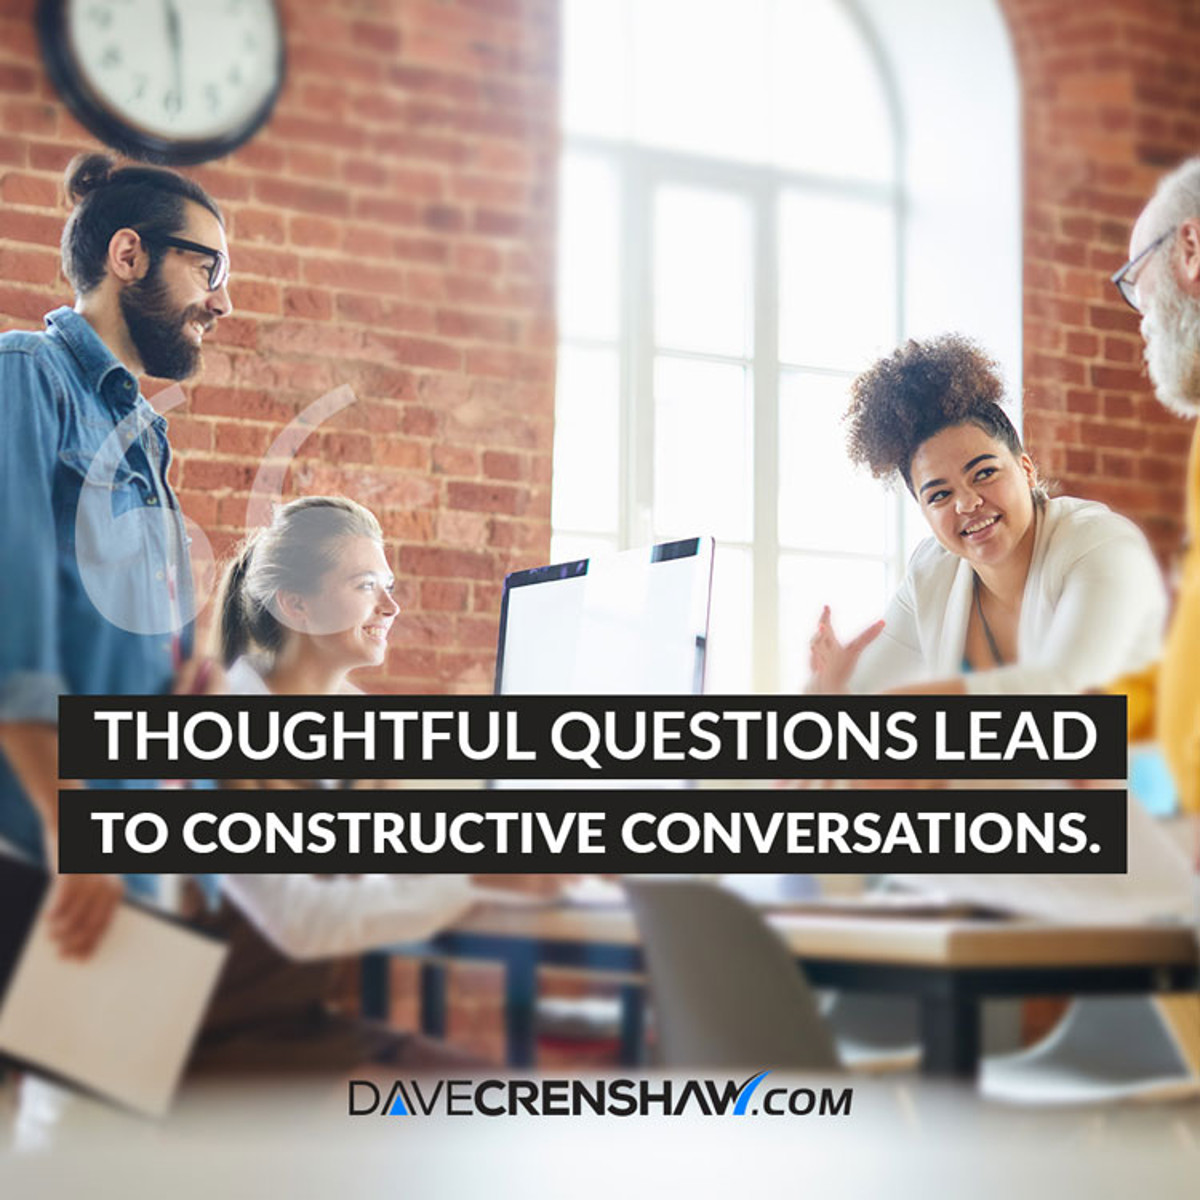 Thoughtful questions lead to constructive conversations